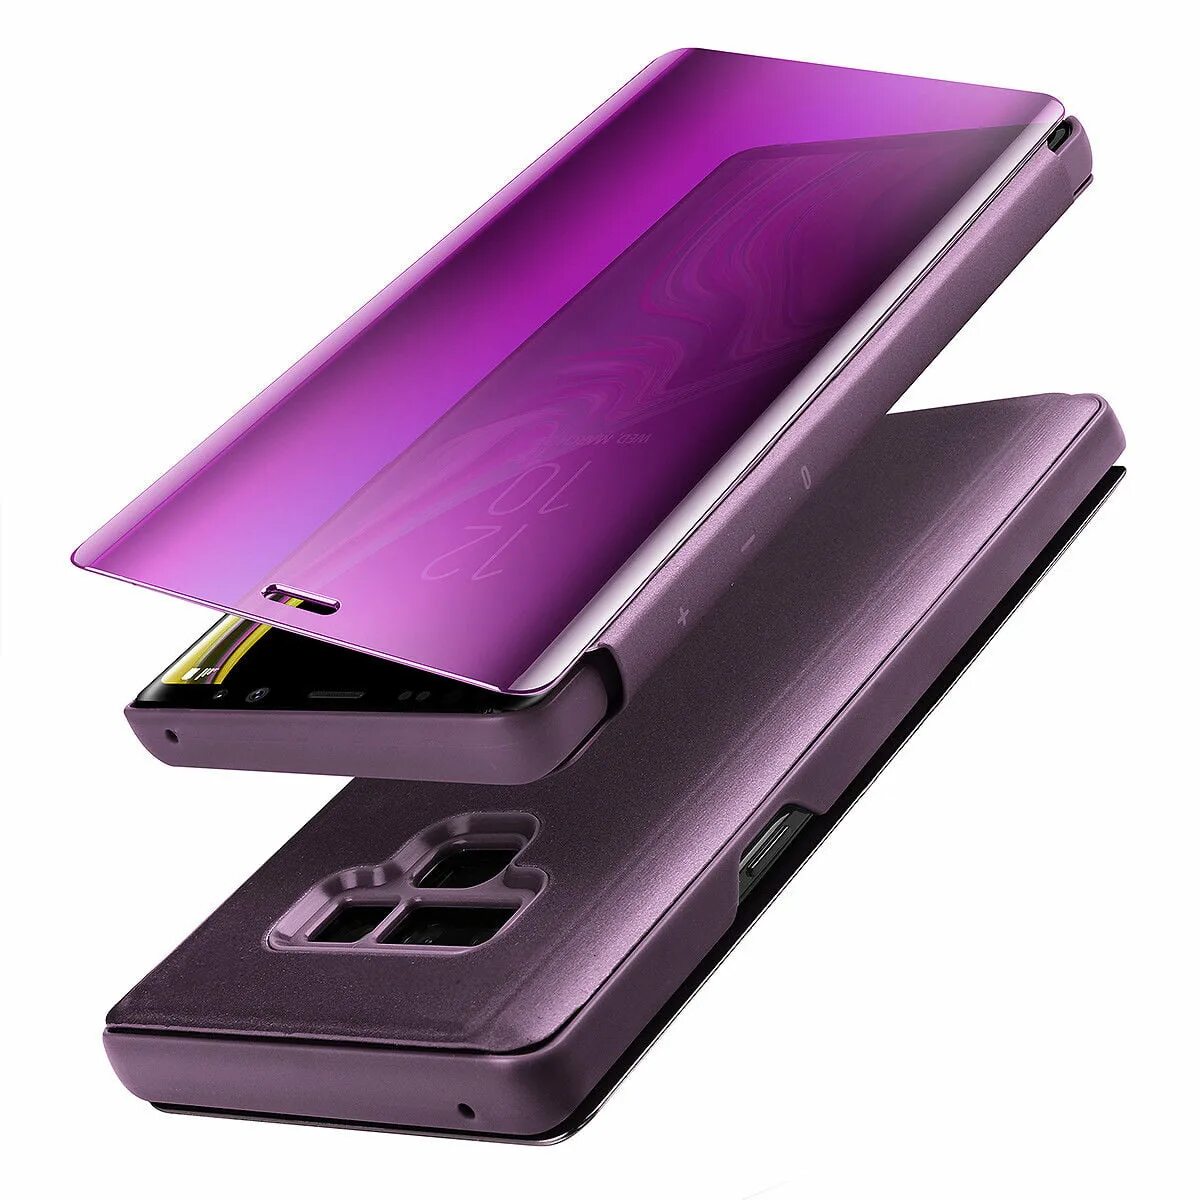 S21 smart clear. Smart Cover Case Samsung Galaxy Note 9. Clear view Galaxy Note 9. Led Cover Samsung Galaxy Note 10. Samsung Galaxy Note 9 Flip.